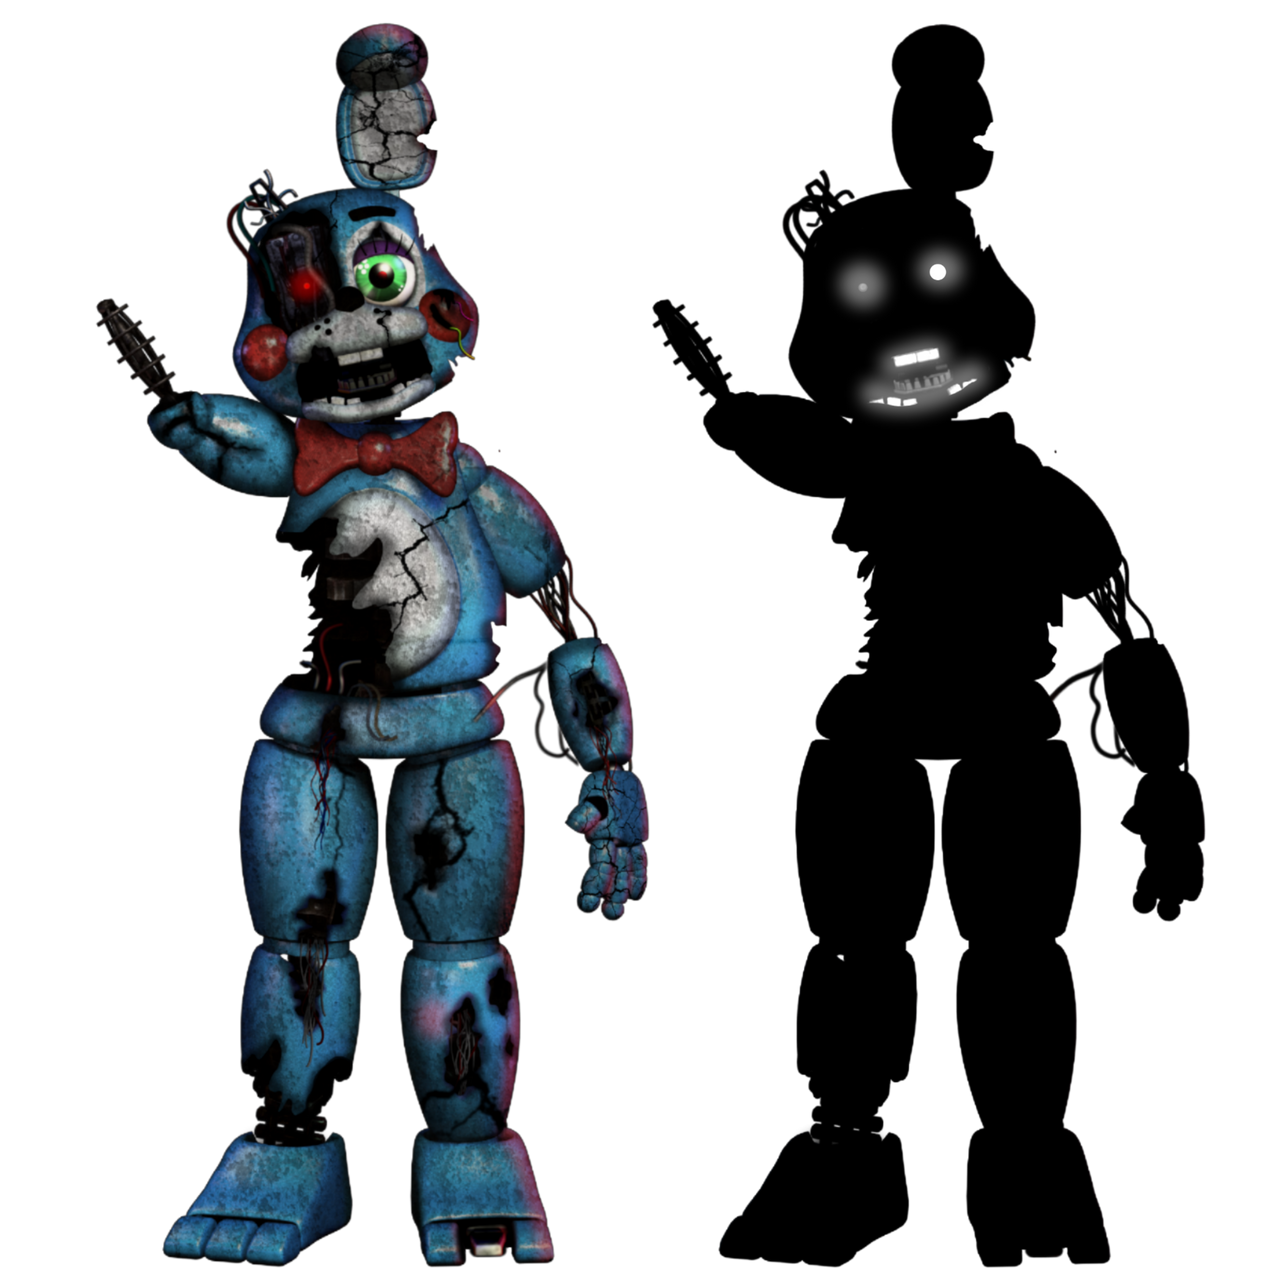 Drawing Of Withered Bonnie (Toy Story Version) by JohnV2004 on DeviantArt